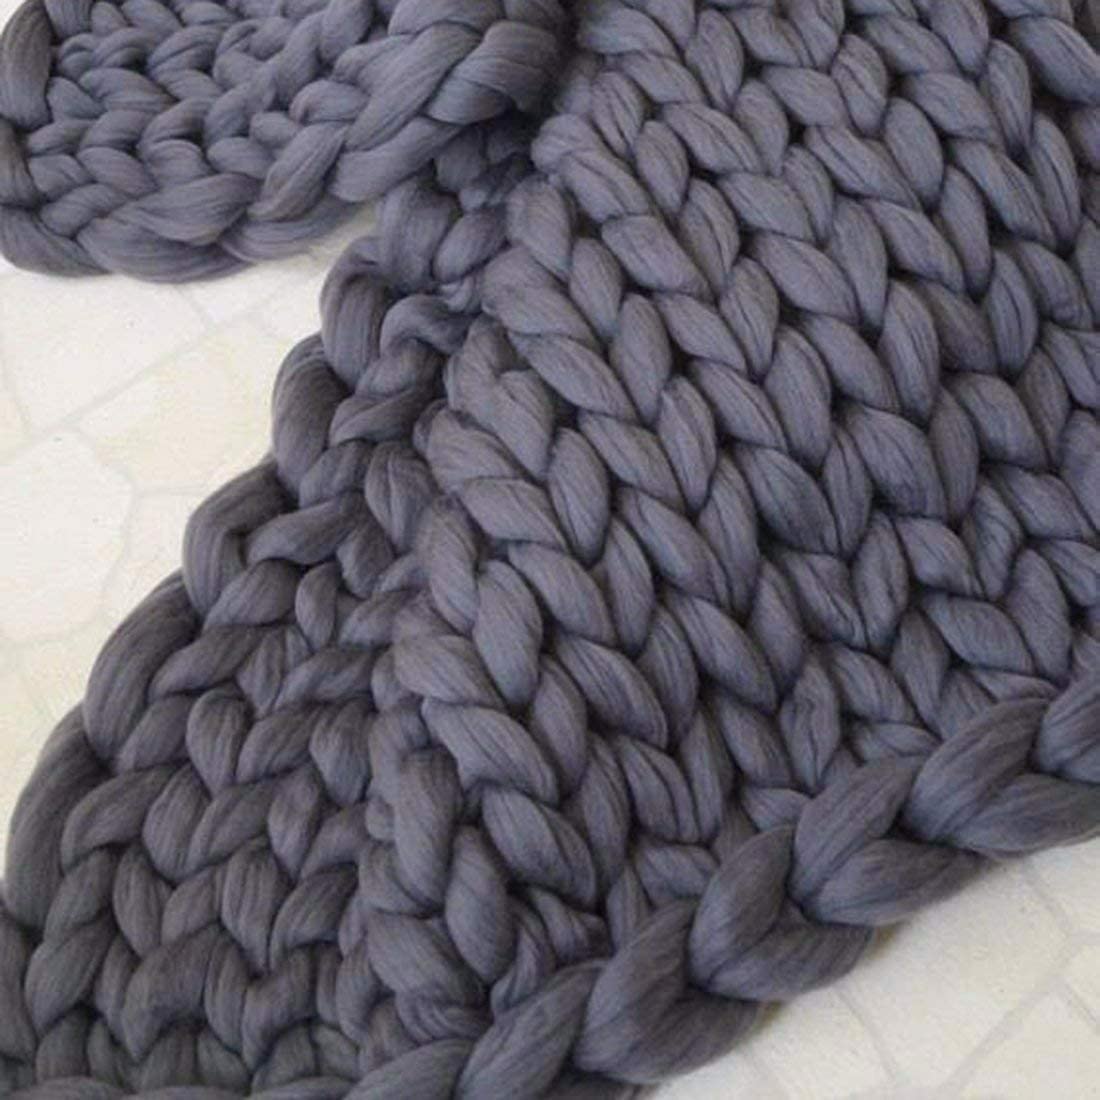 Size 60x60 Inches Chunky Knit Blanket Merino Wool Arm Knitted Throw Soft and Huge Throw,Bed Chair Sofa Yoga Mat Rug Gray Dark 